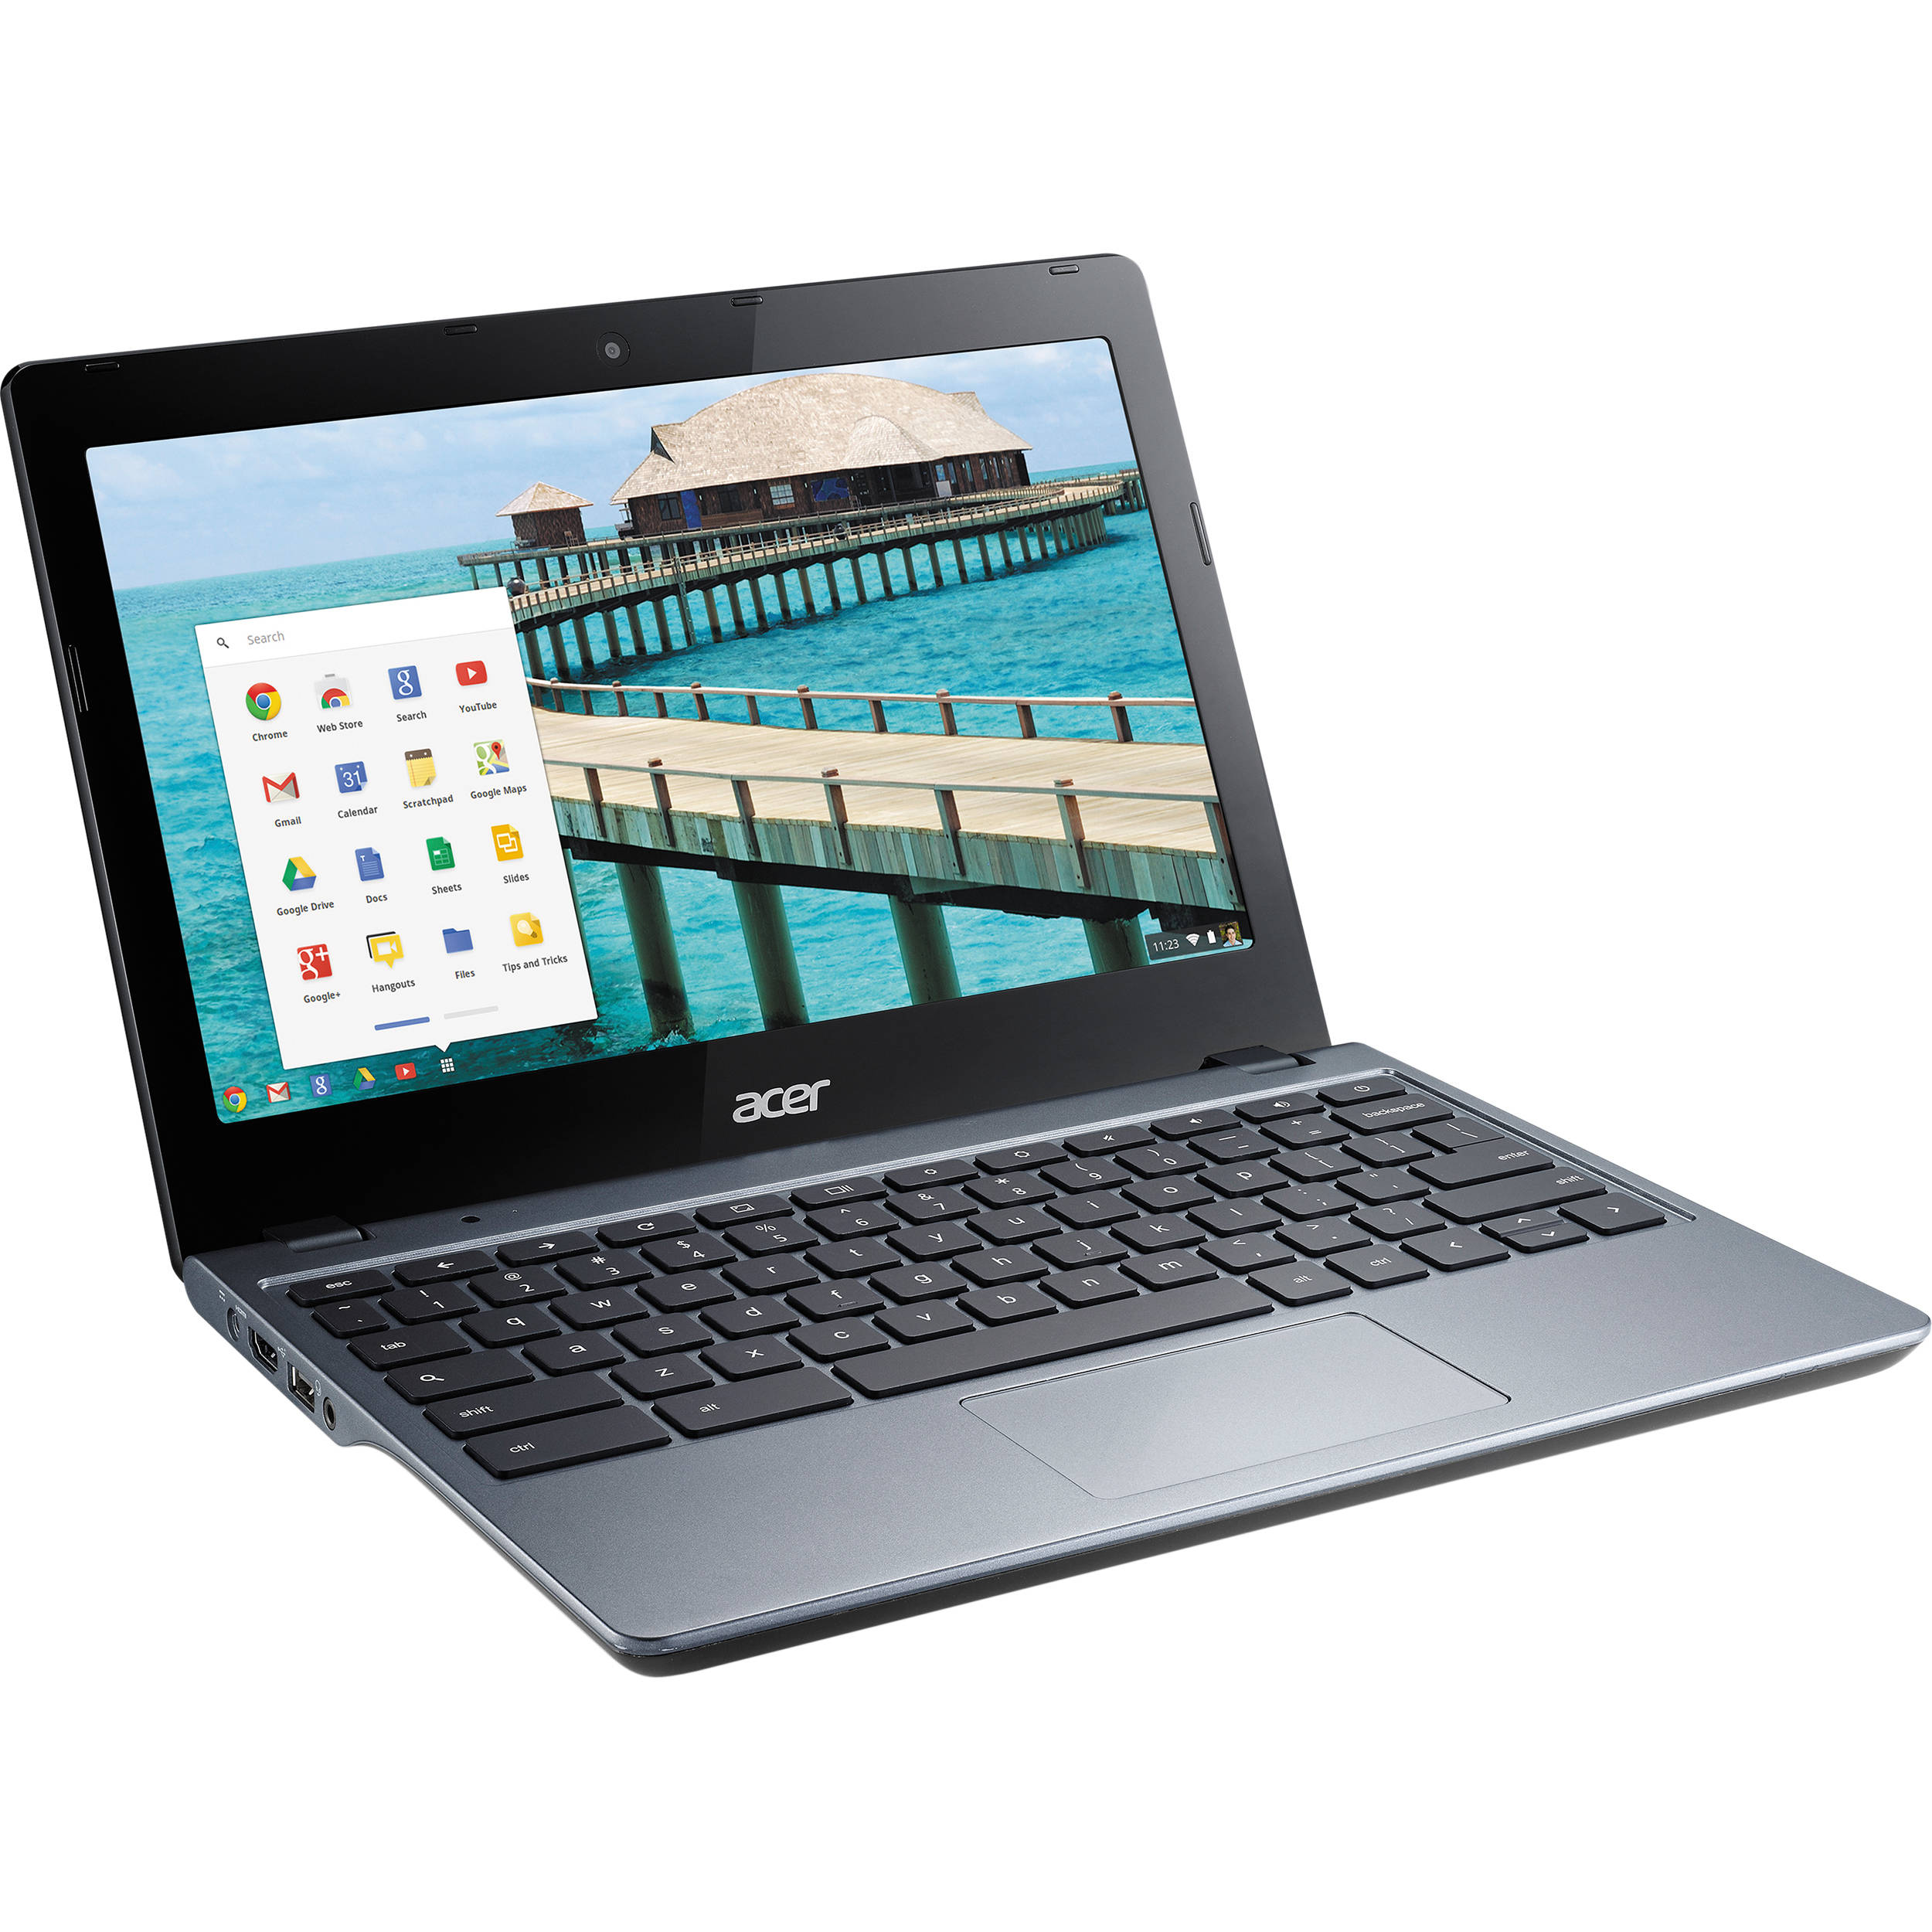 Acer Chromebook C720P Laptop Computer, High Definition Touchscreen 11.6" Display, Intel Dual-Core Processor, 16GB Solid State Drive, 4GB RAM, Chrome OS, WiFi